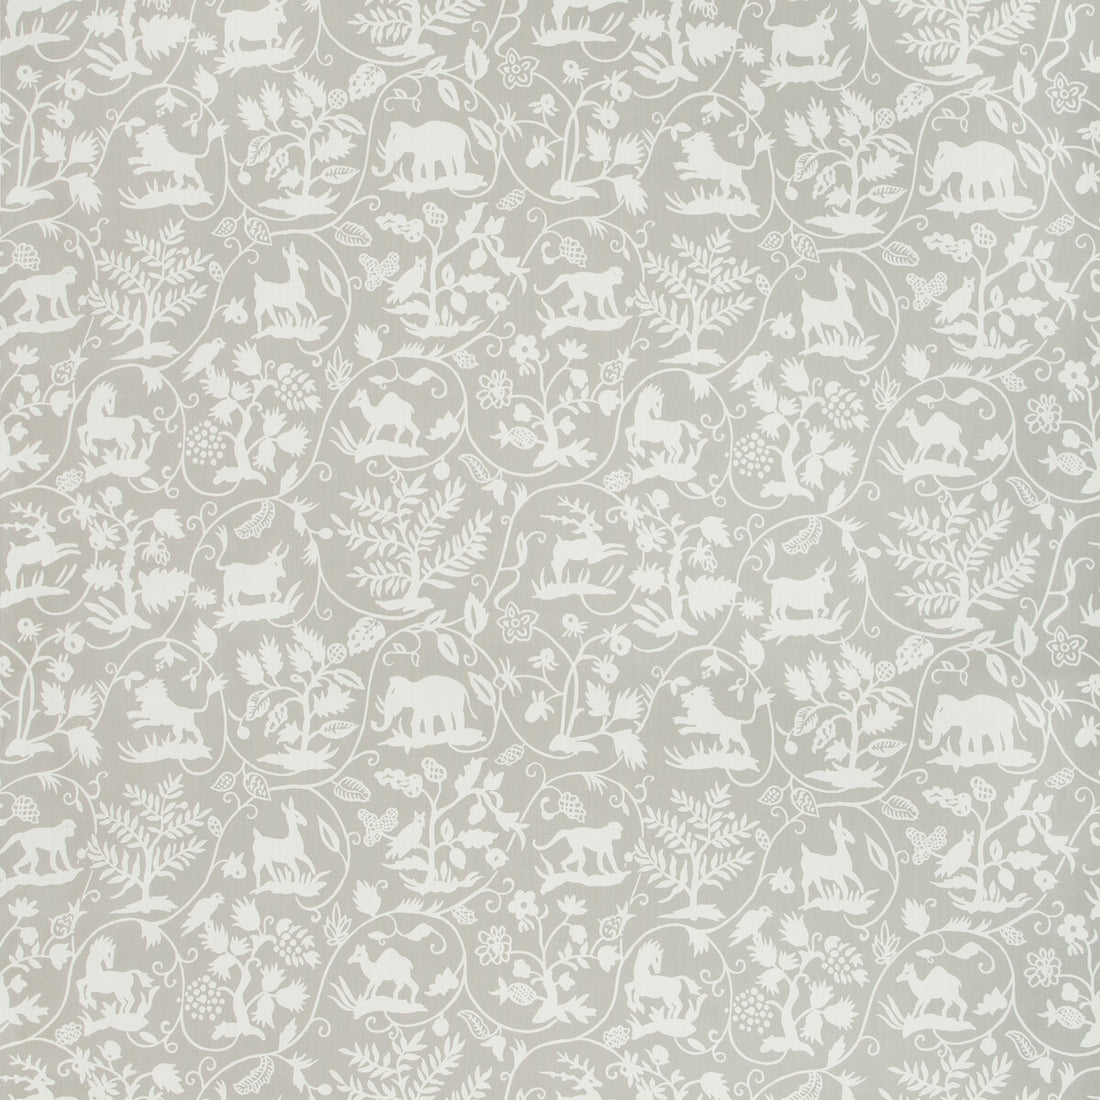 Animaltale fabric in gull color - pattern ANIMALTALE.11.0 - by Kravet Basics in the Bermuda collection